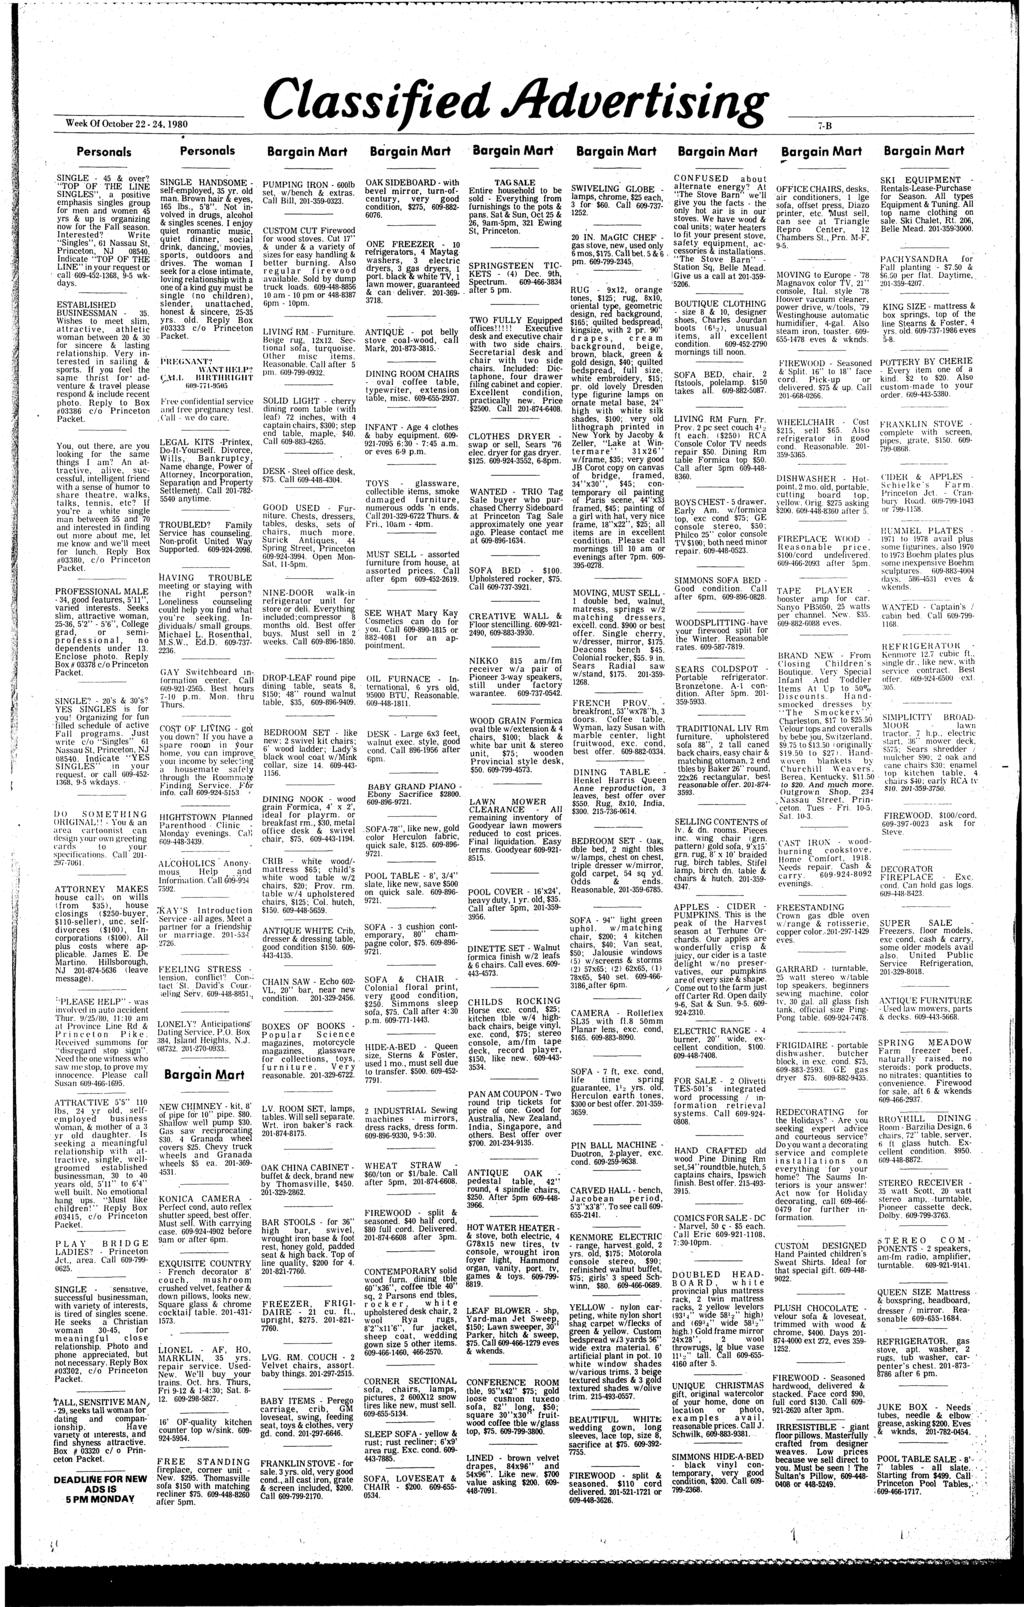 Week Of October 22-24.1980 Classified Advertising 7-B Personals Personals Bargain Mart Bargain Mart Bargain Mart Bargain Mart Bargain Mart Bargain Mart Bargain Mart "4 XT, 3 4 I SINGLE - 45 & over?